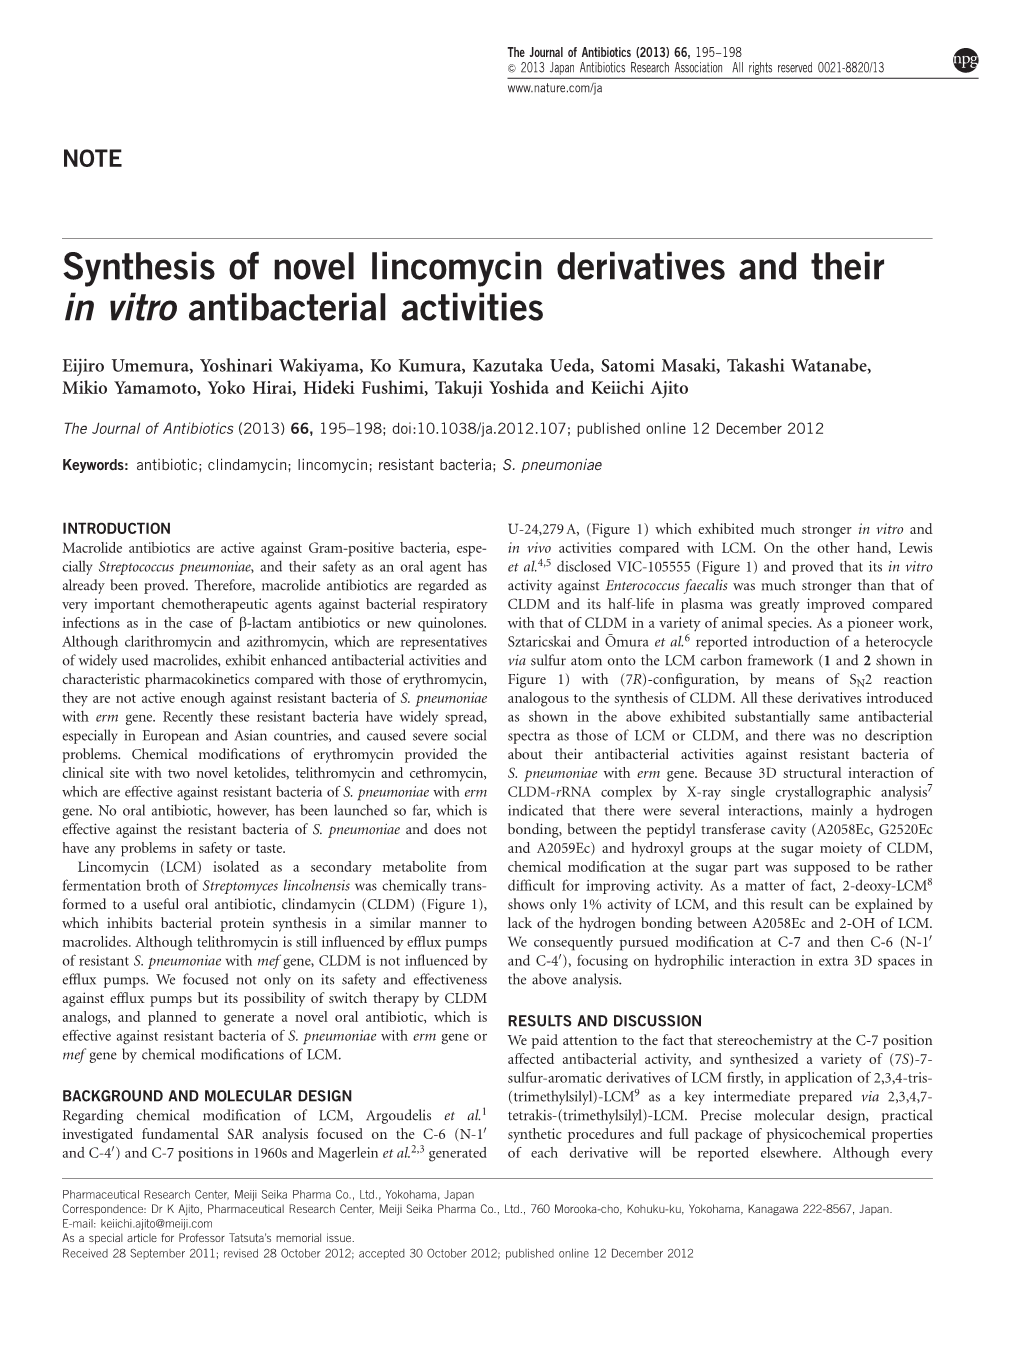 Synthesis of Novel Lincomycin Derivatives and Their in Vitro Antibacterial Activities